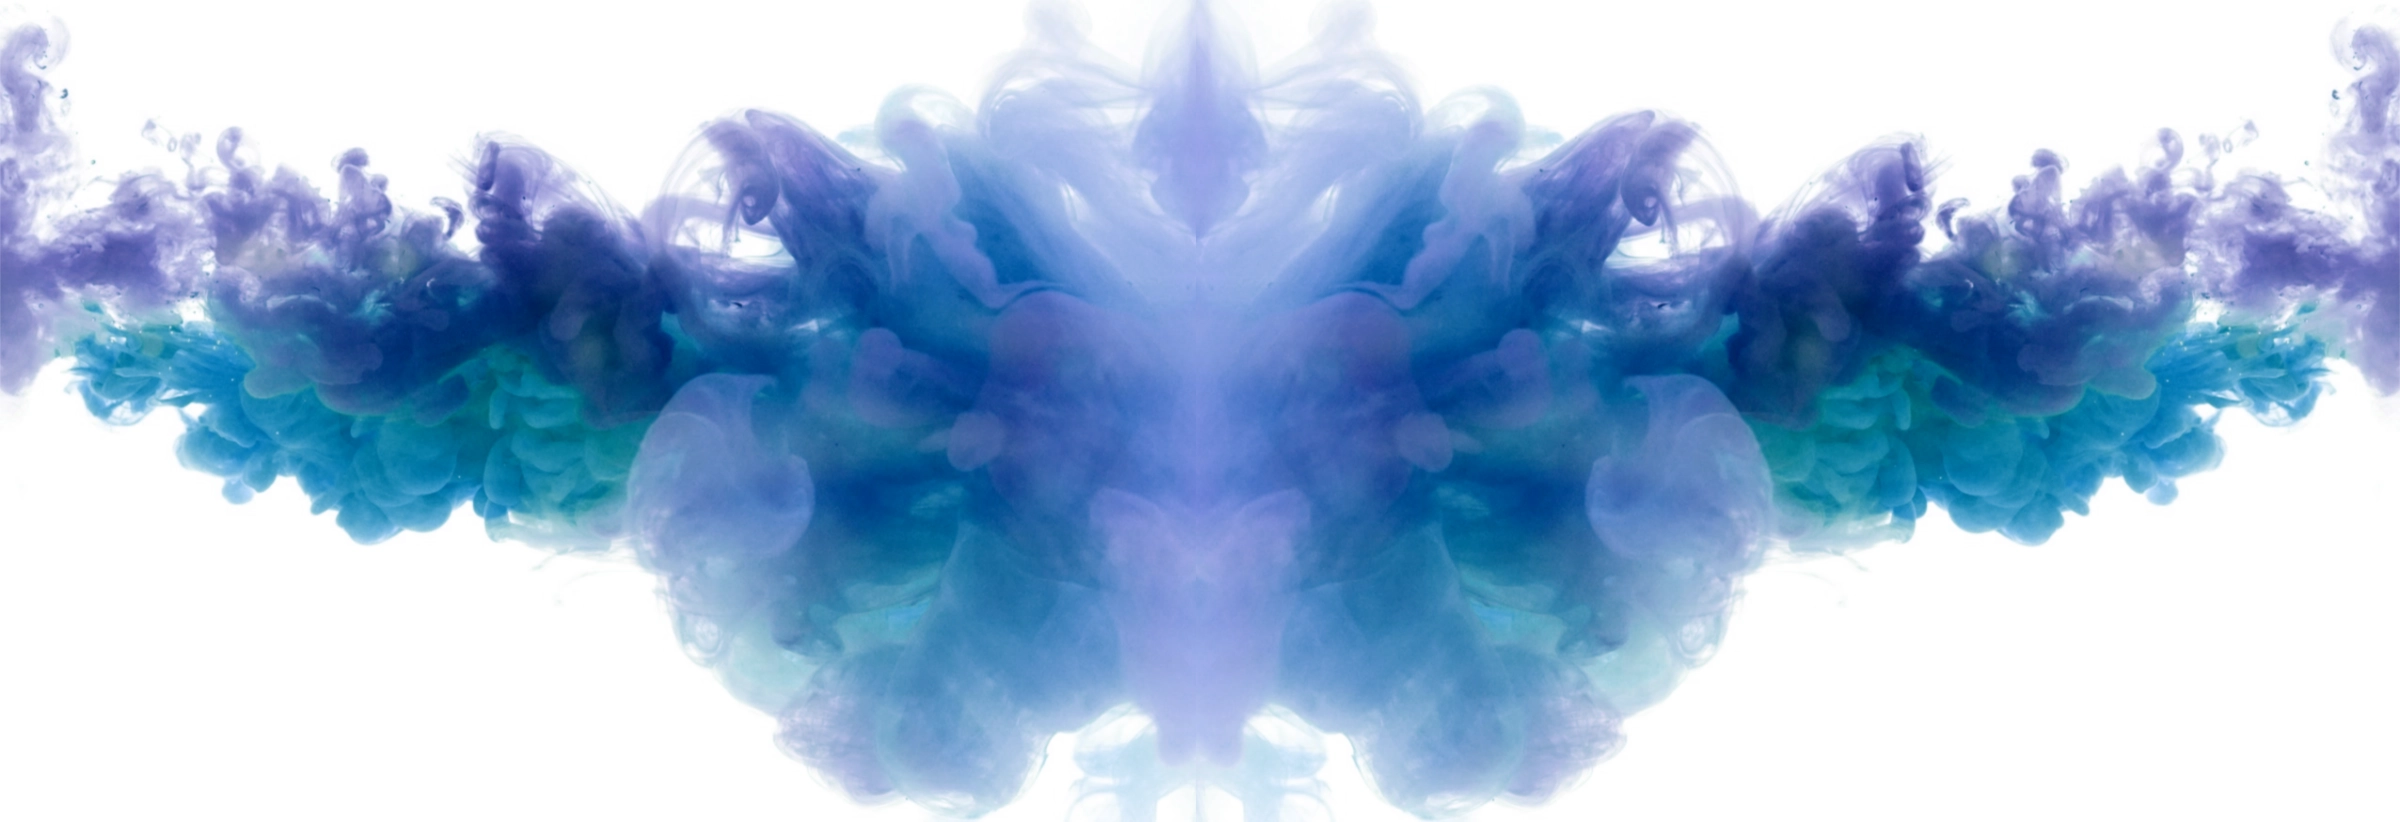 107-r313-blue-smoke-together-2-1566261712743.png